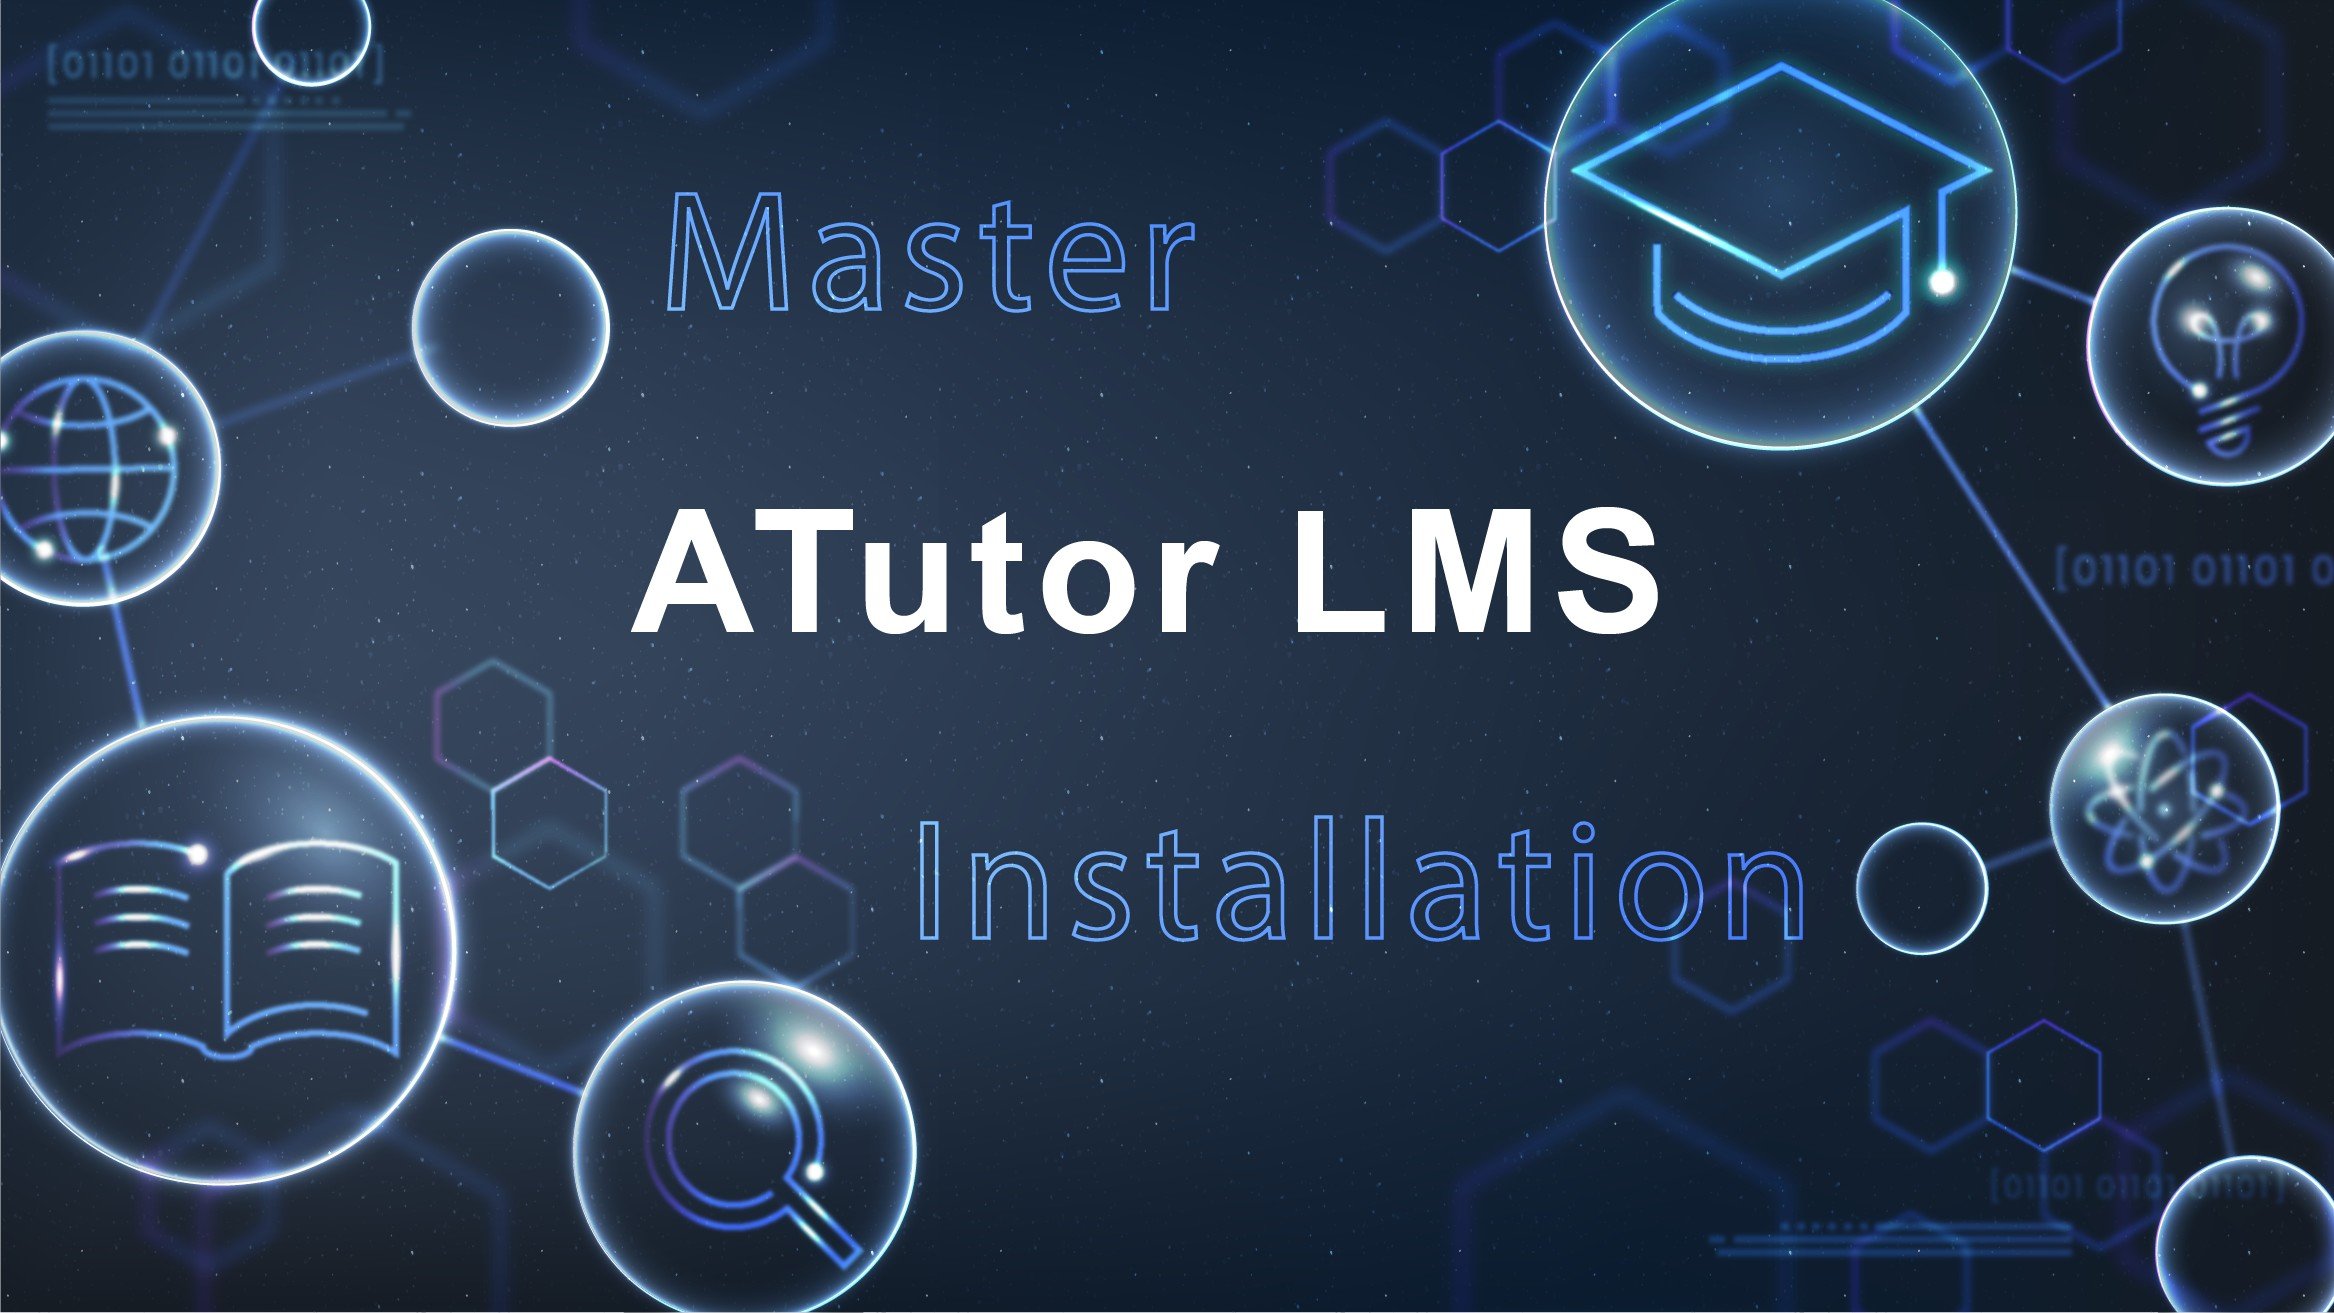 Discover ATutor LMS Demo and Master Its Installation on Ubuntu With Webmin